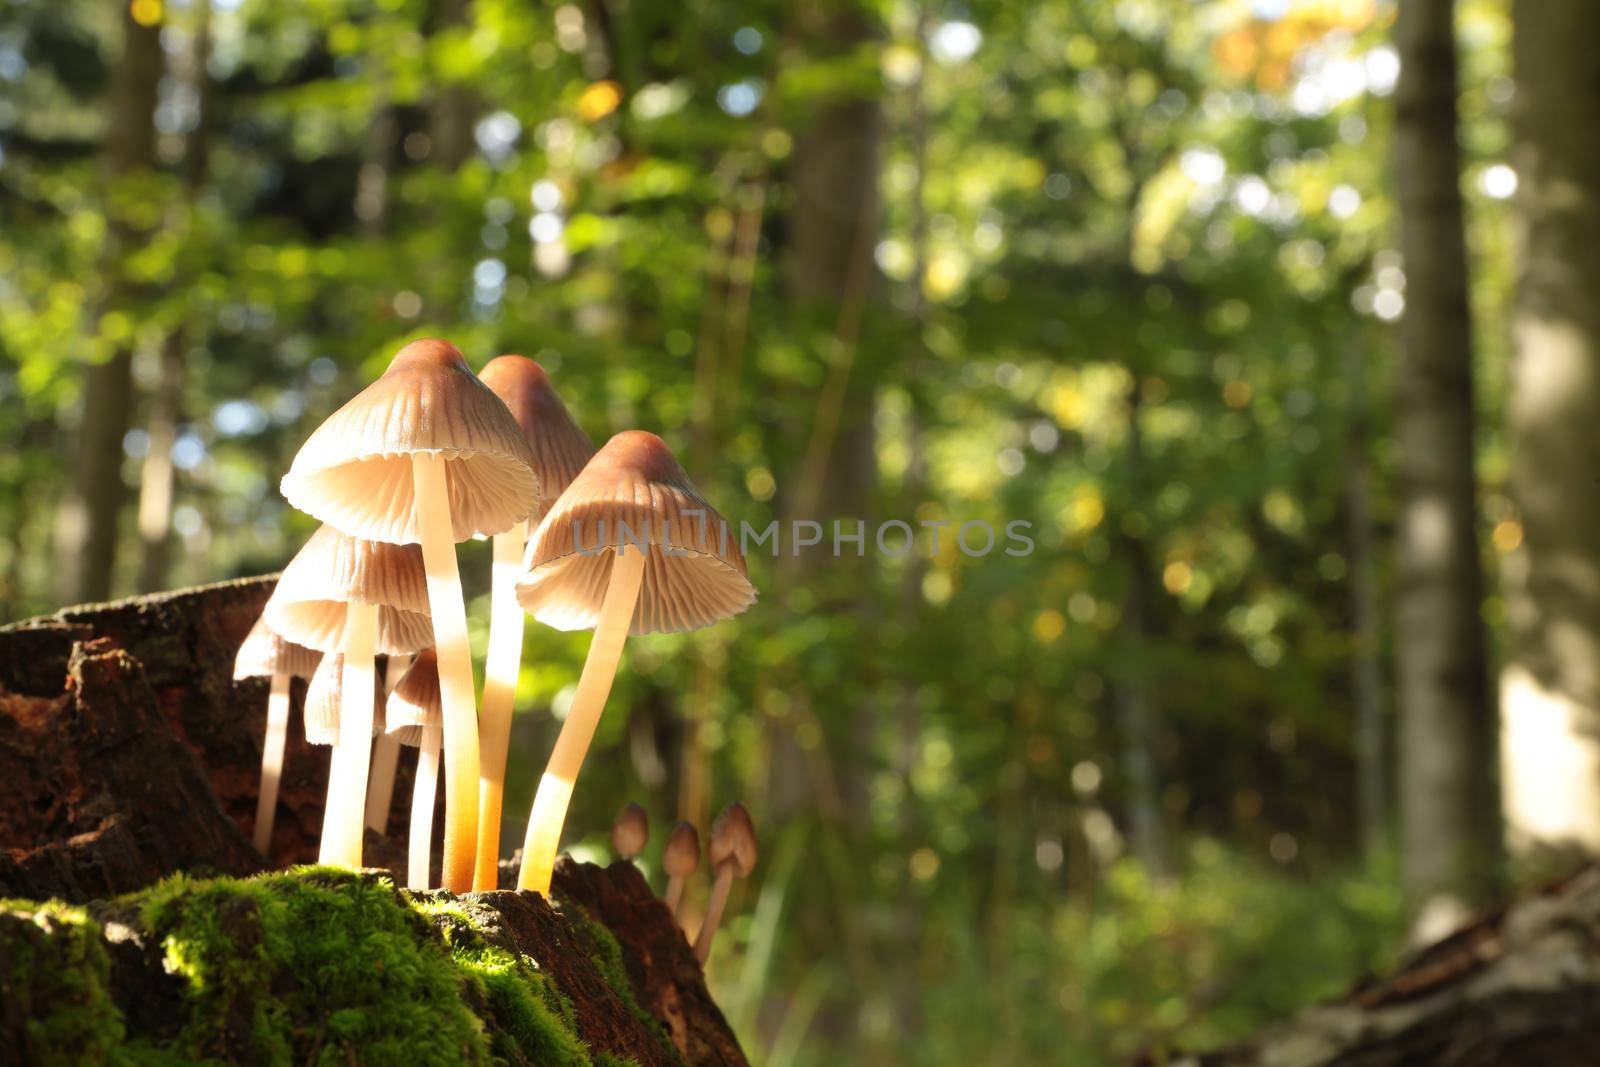 Mushrooms on a tree trunk by nature78